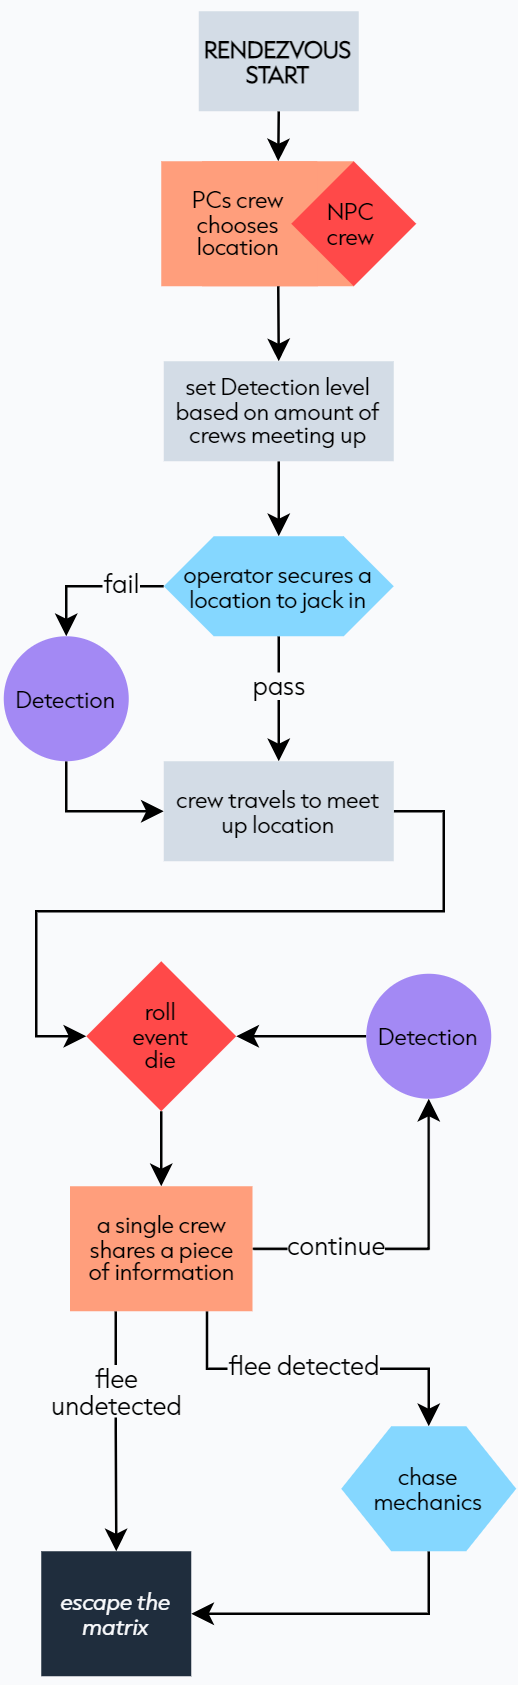 A flow chart of the rendezvous procedure